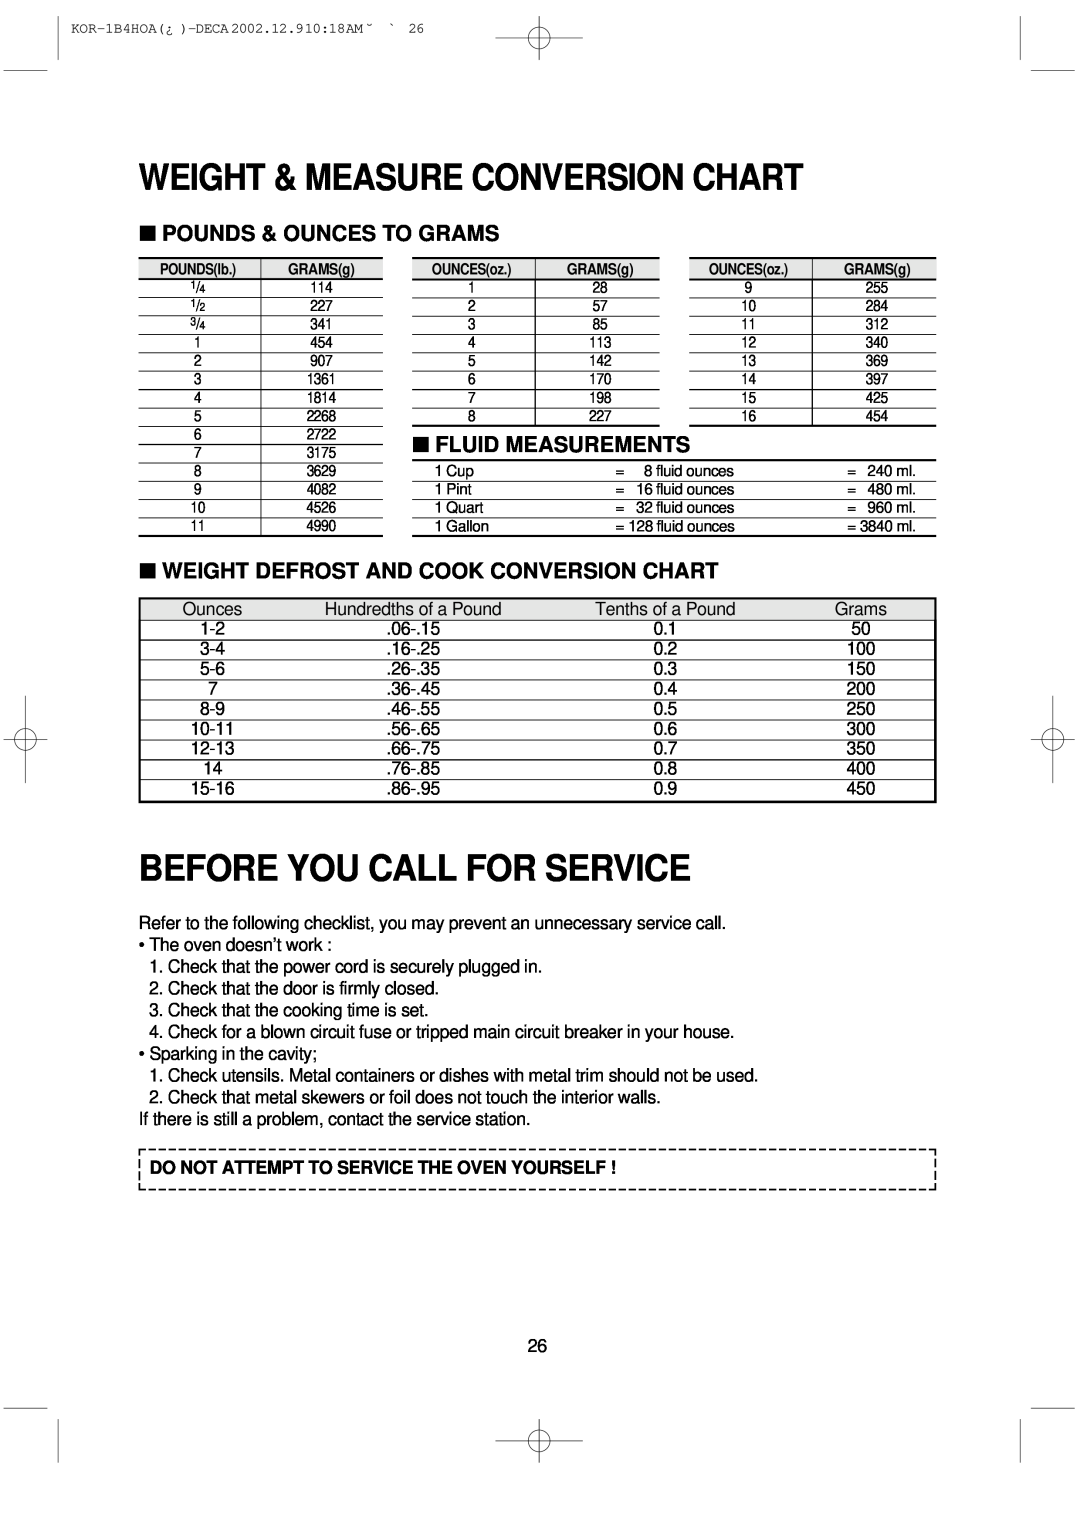 Daewoo KOR-1B4H manual Weight & Measure Conversion Chart, Before You Call For Service, Pounds & Ounces To Grams 